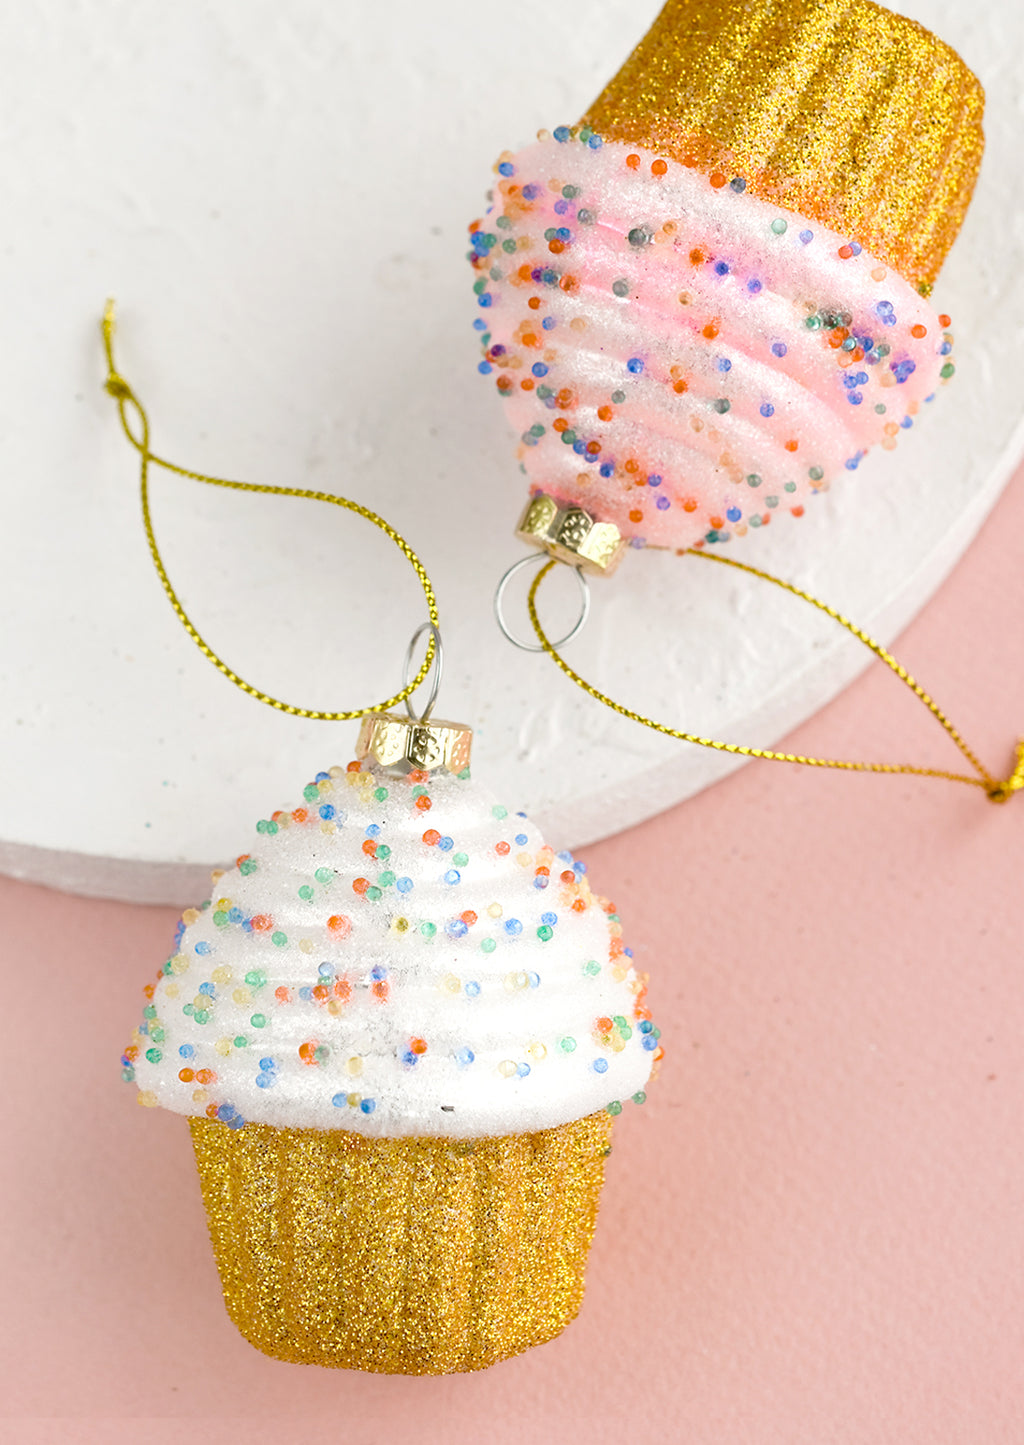 2: Glass ornaments of frosted, sprinkled cupcakes in white and pink.